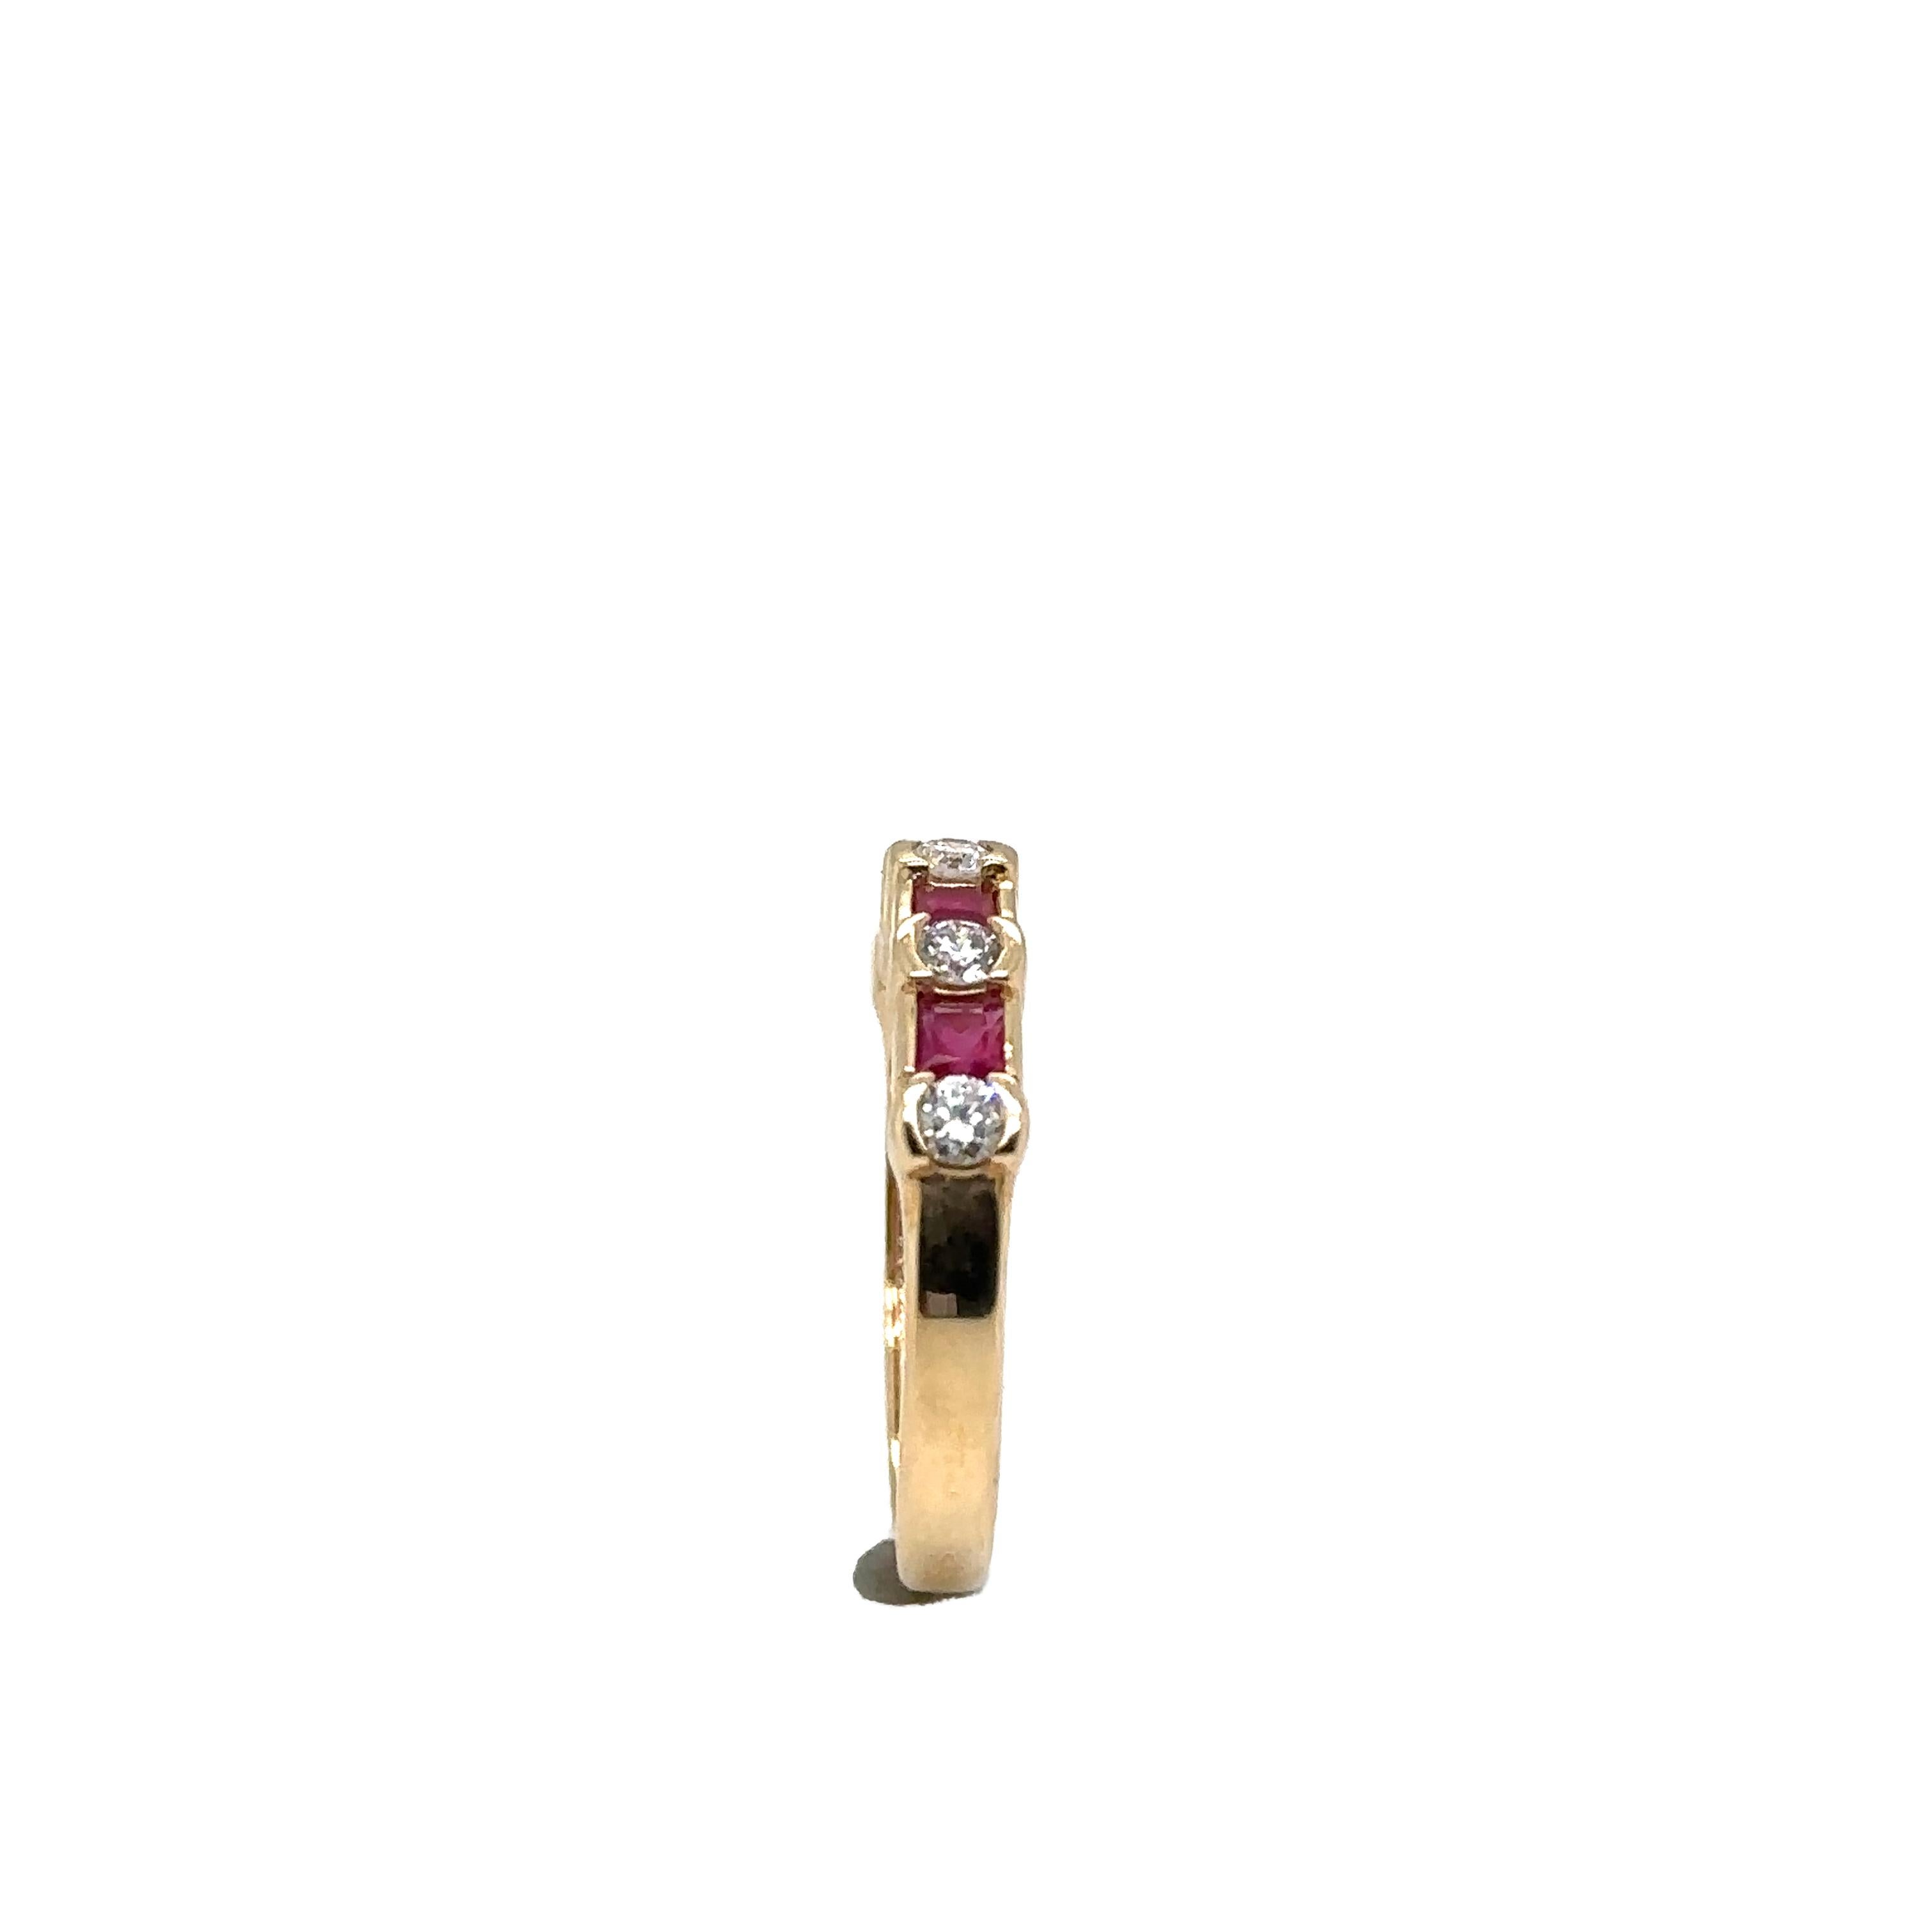 Women's JAS-21-2221 - 14K YELLOW GOLD 0.35Ct GH-SI1 DIAS AND 0.40CT PRINCESS CUT RUBIES For Sale